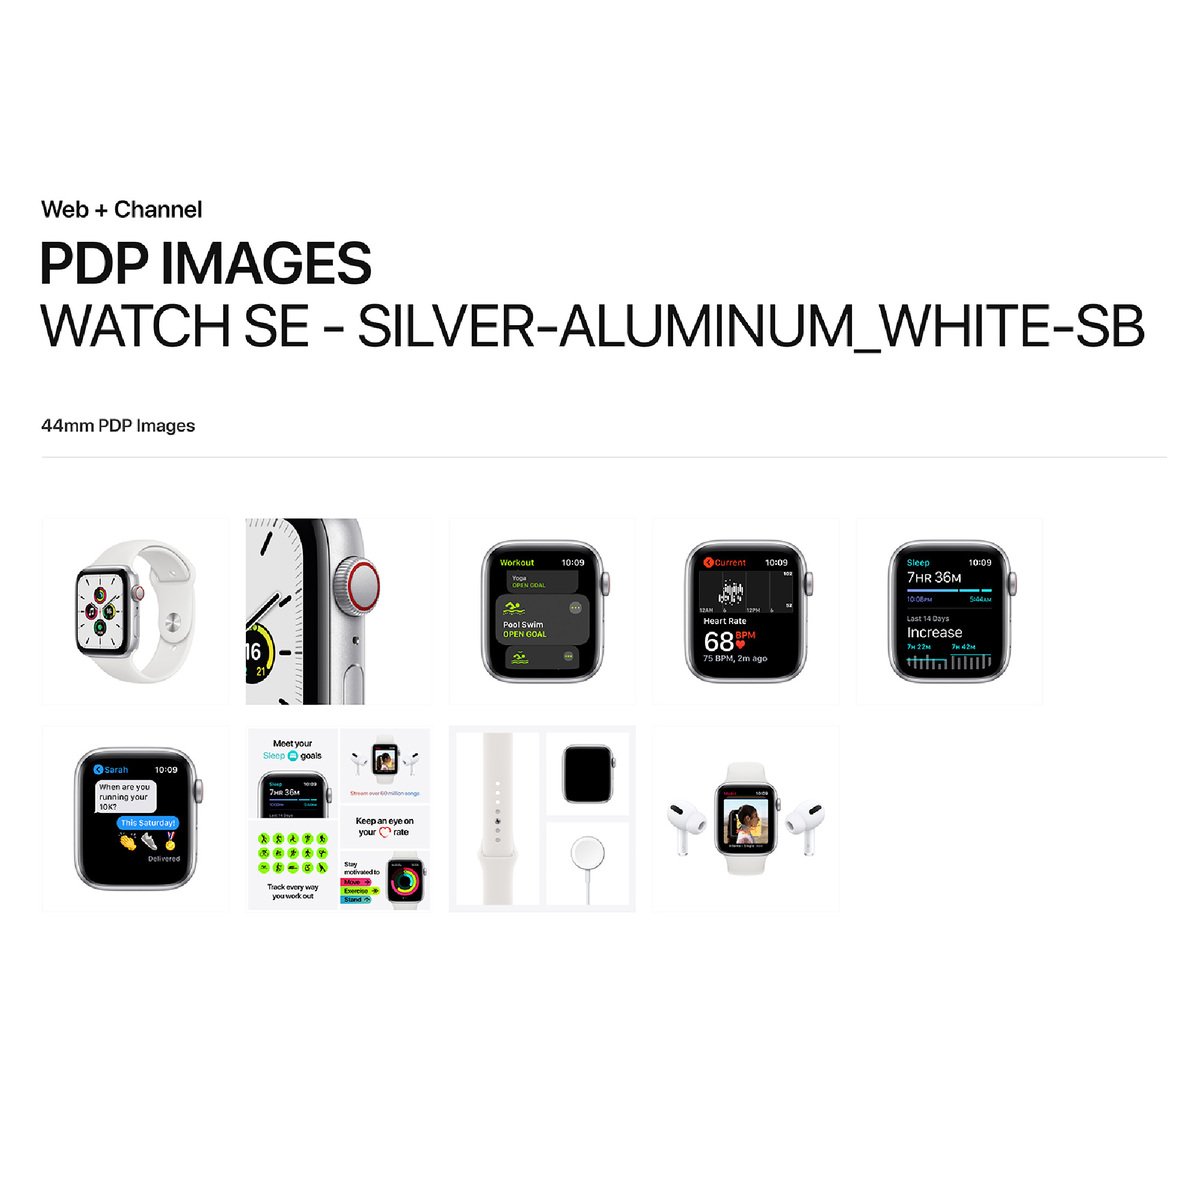 Apple Watch SE GPS + Cellular MYEF2AE/A 40mm Silver Aluminum Case with Sport Band White